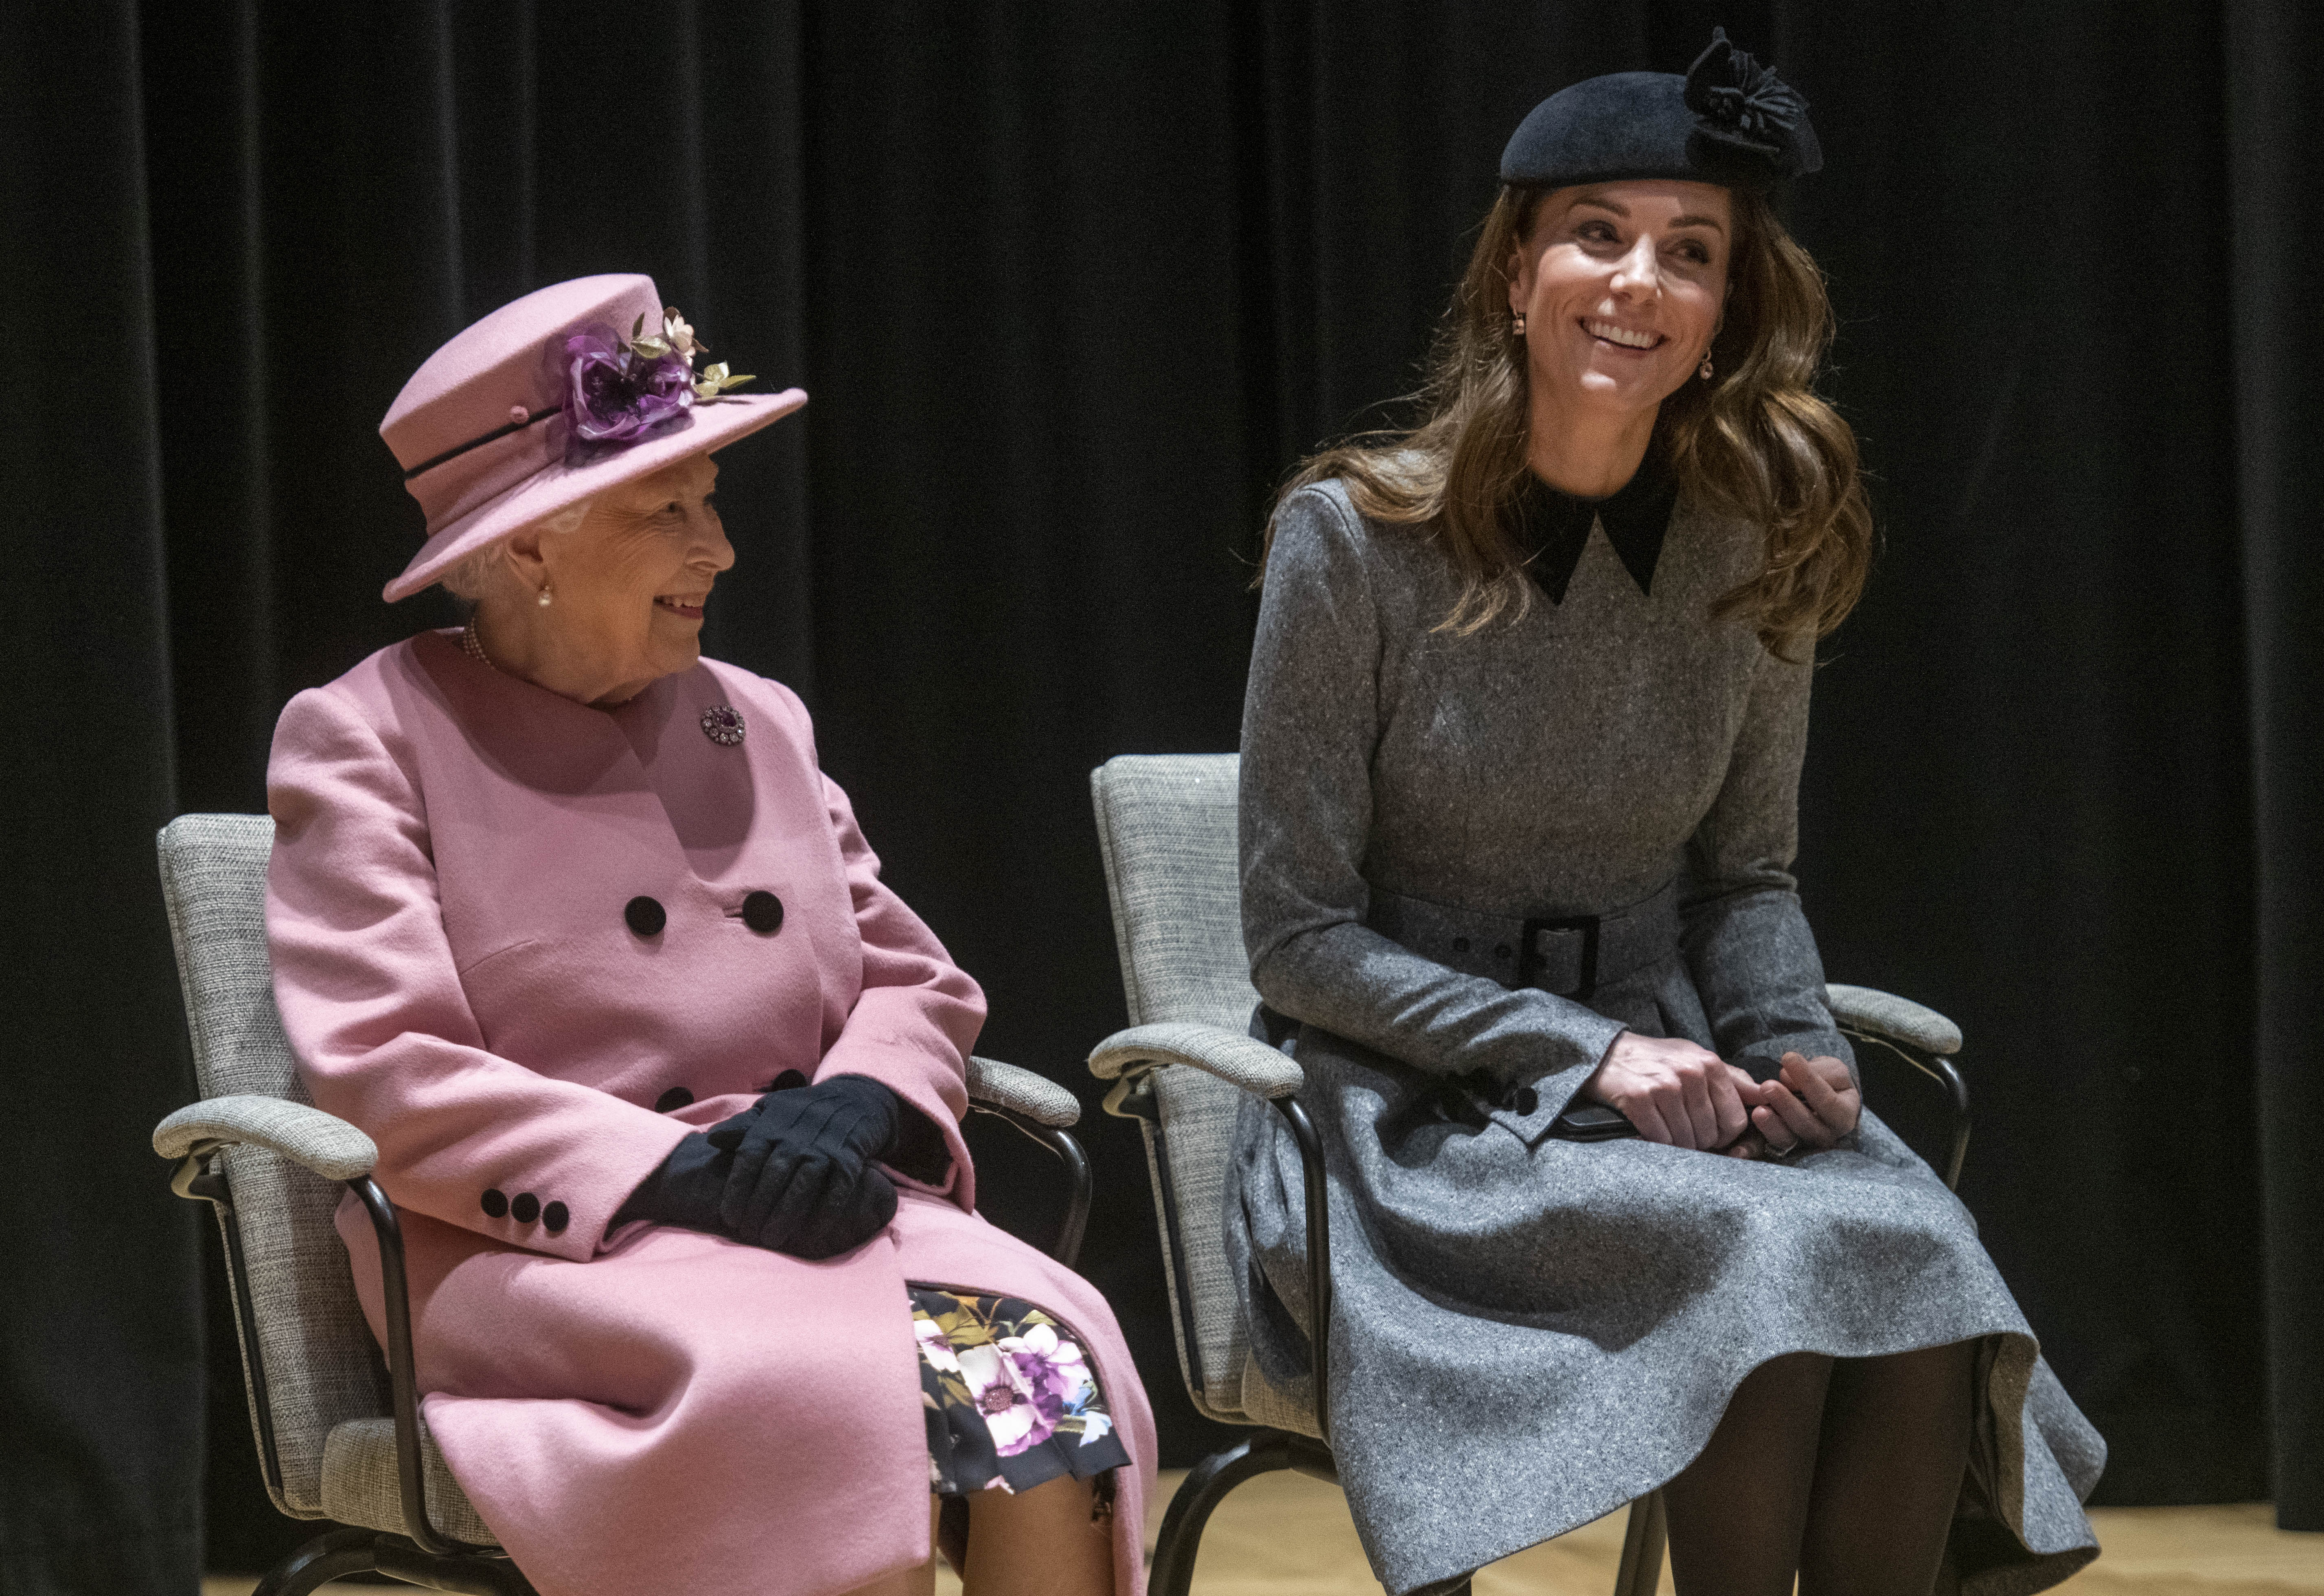 Queen Elizabeth II and Kate Middleton on March 19, 2019, in London, England. | Source: Getty Images